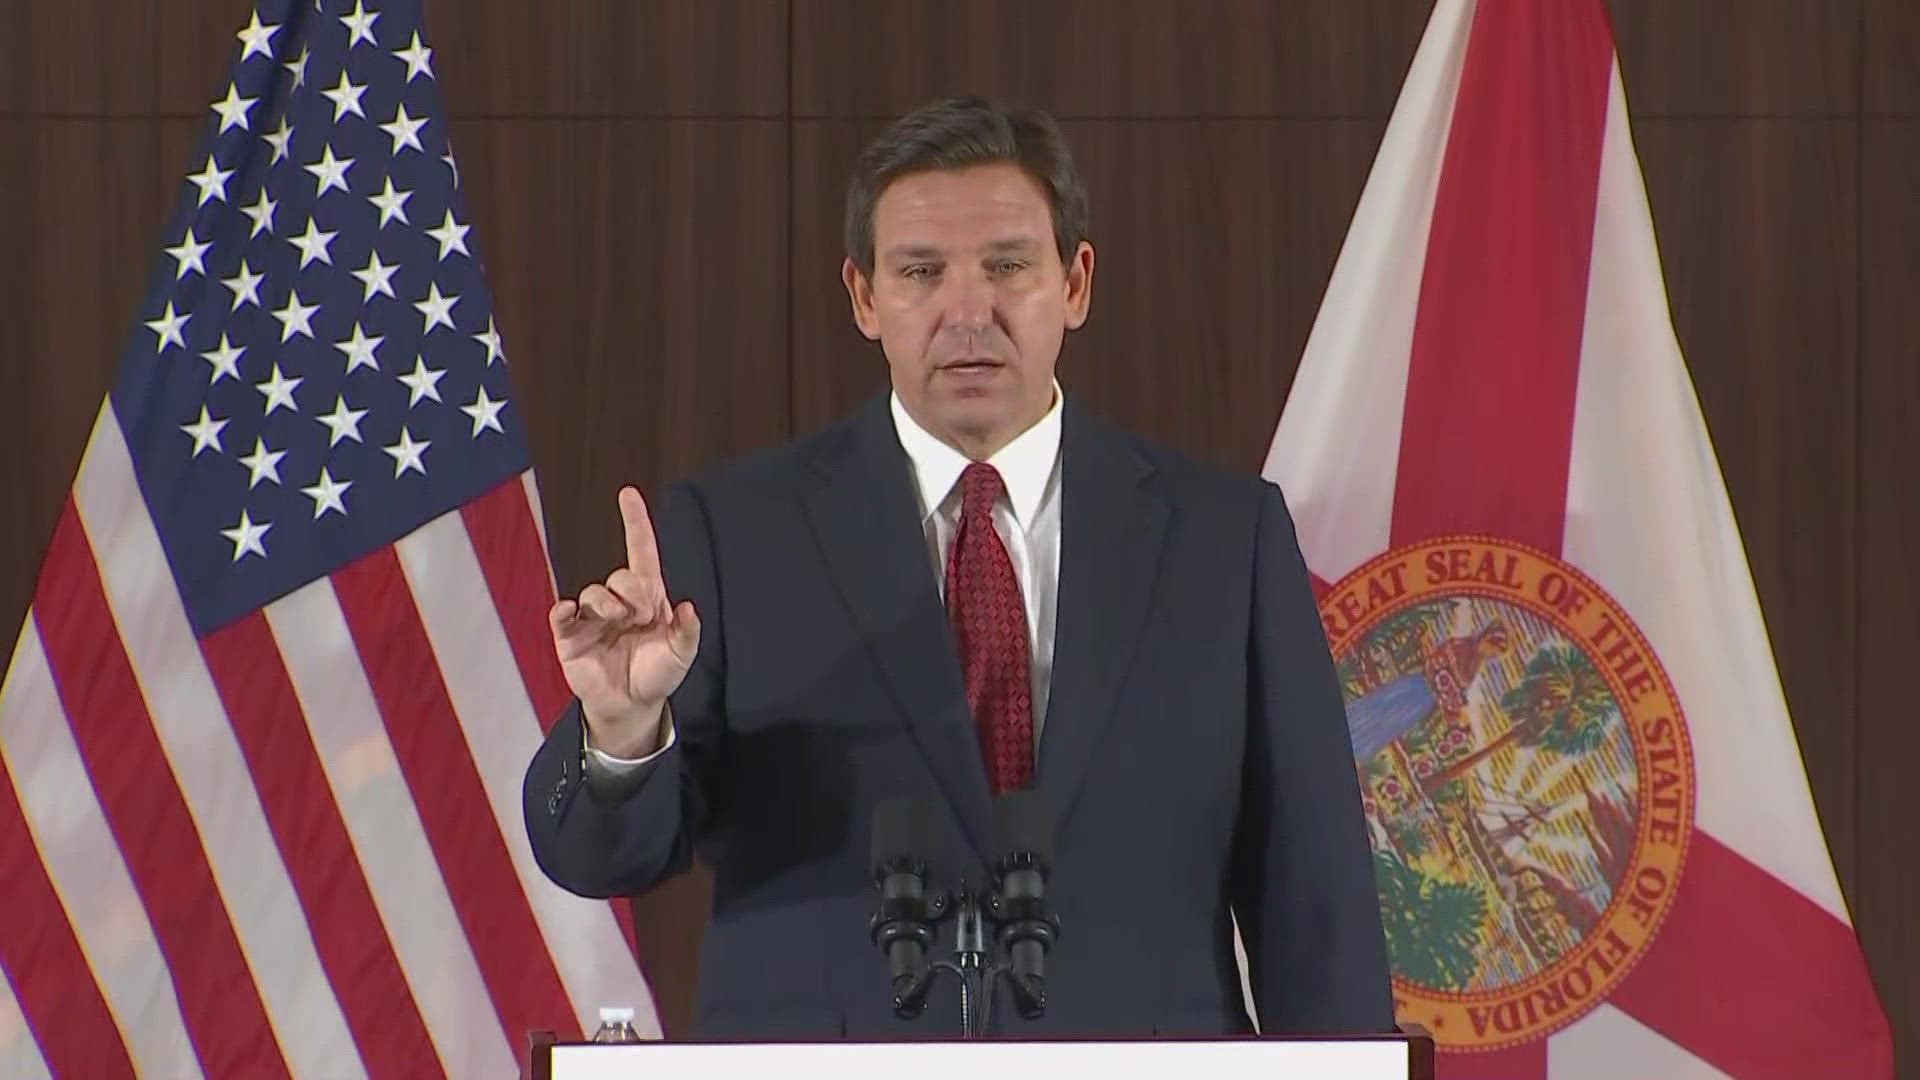 Speaking from Miami, DeSantis announced that the comprehensive proposal is to "maintain and further improve Florida’s 50-year record low crime rate."